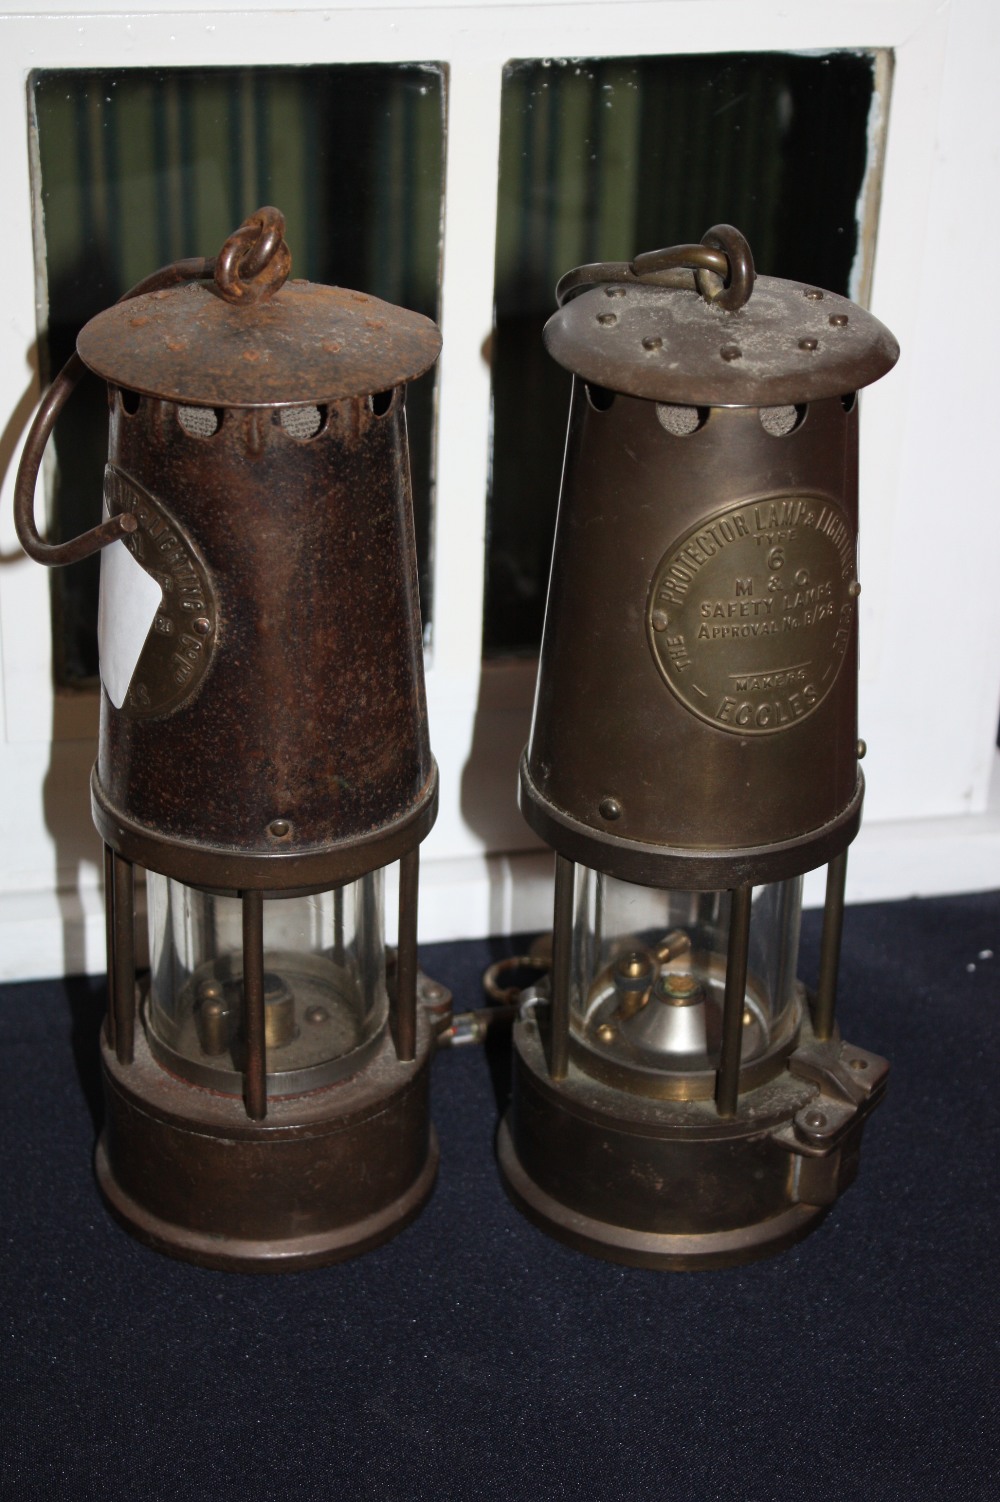 Two Eccles brass miners lamps, one with colliery tag